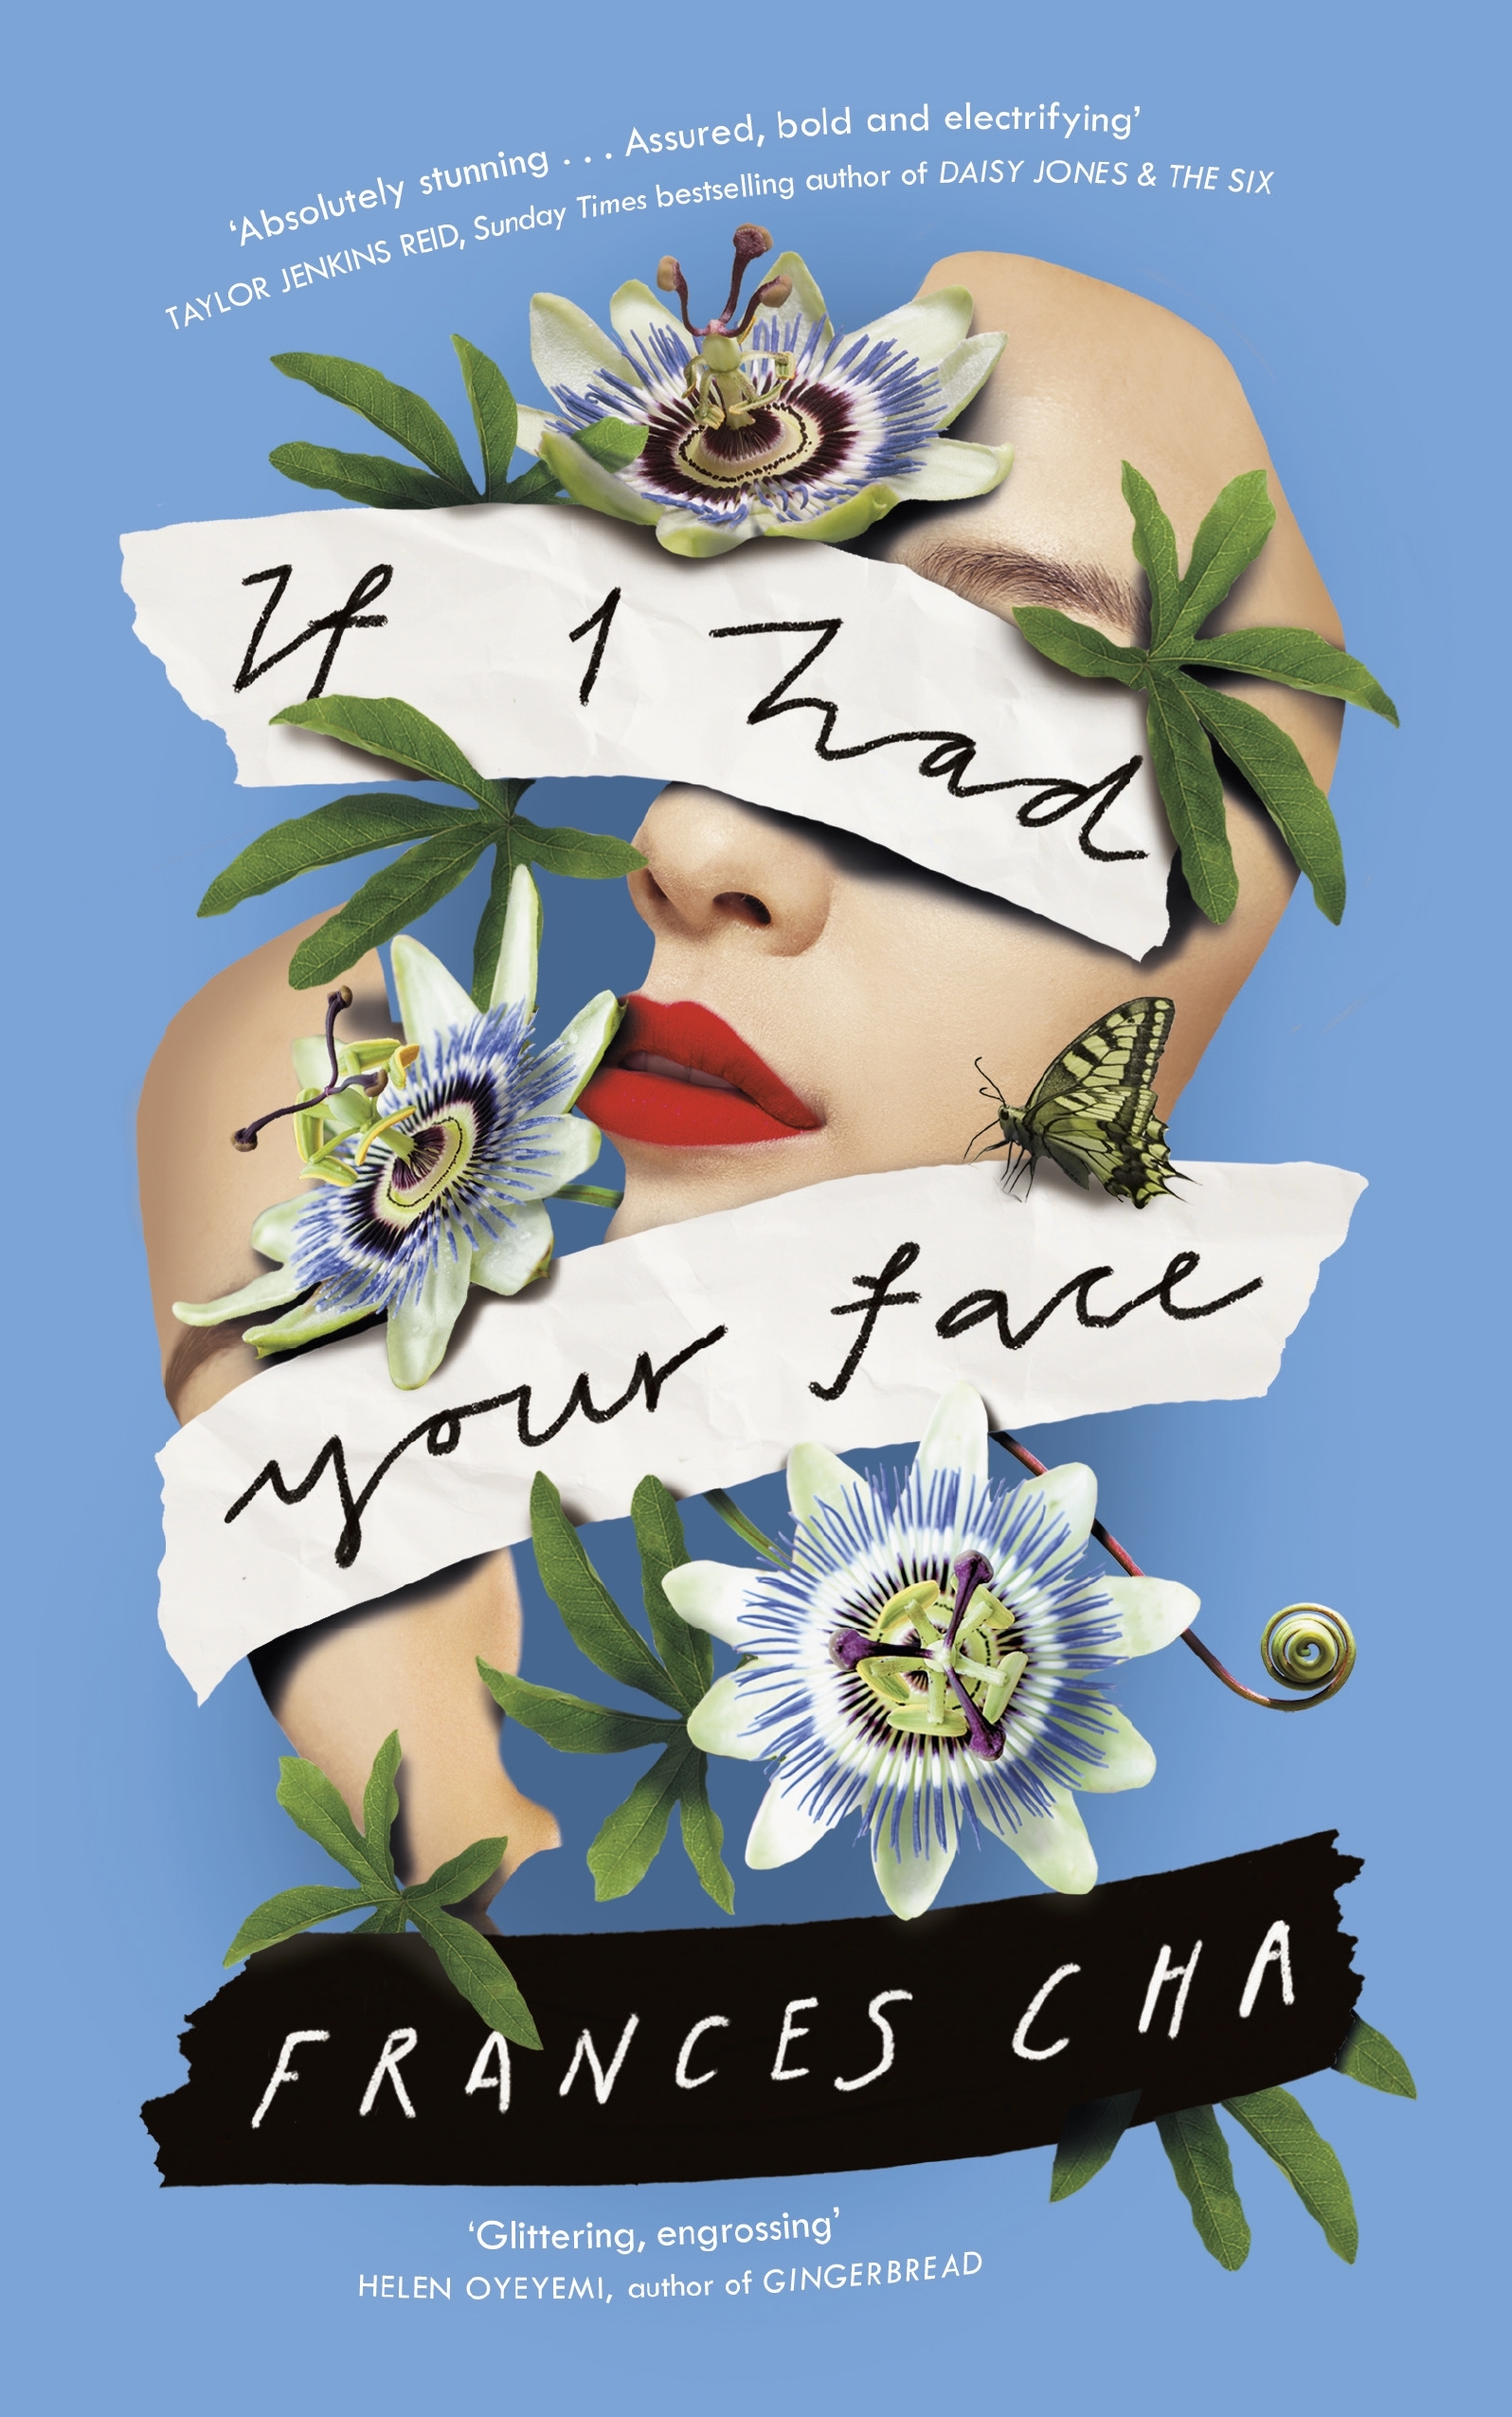 The cover of If I Had Your Face by Frances Cha with a broken face and flowers